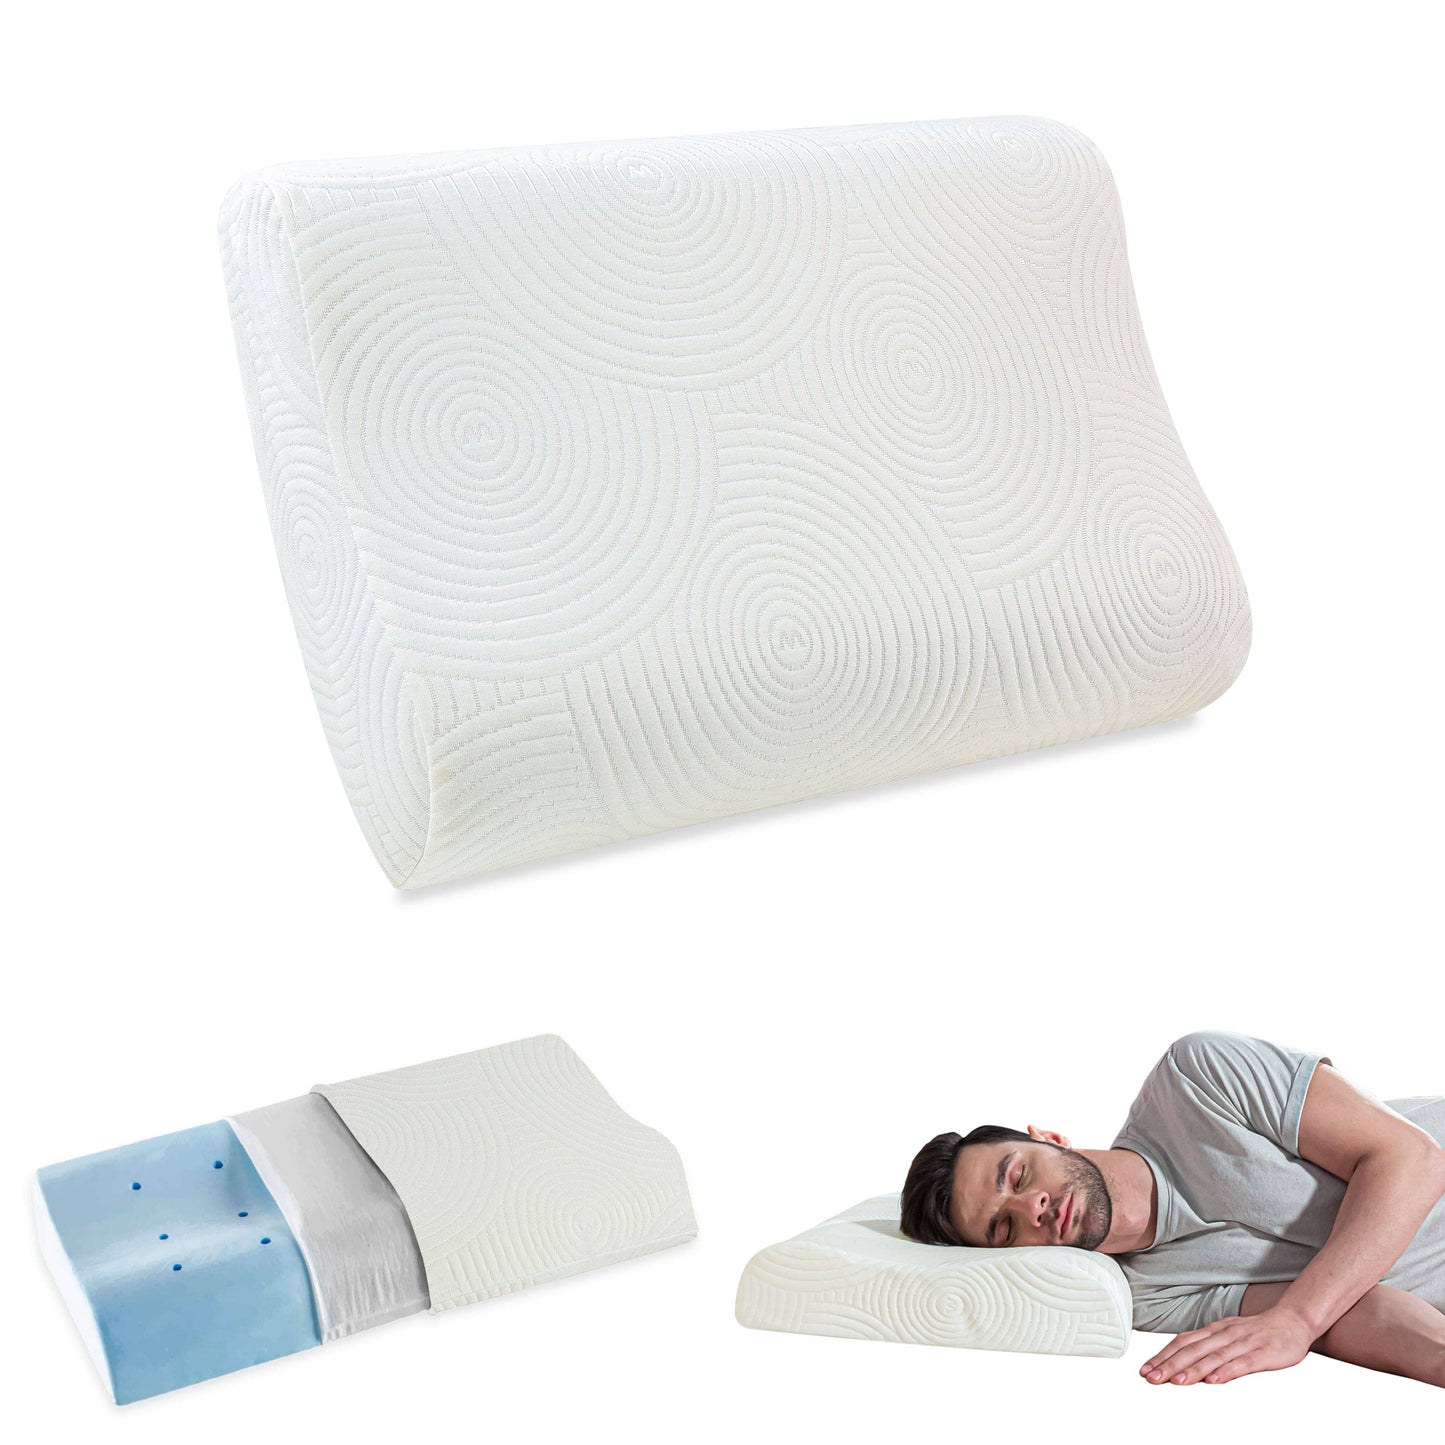 Aloe - Cooling Gel Memory Foam Cervical Pillow - Contour - Medium Firm Contour Pillow The White Willow X-Small White 1